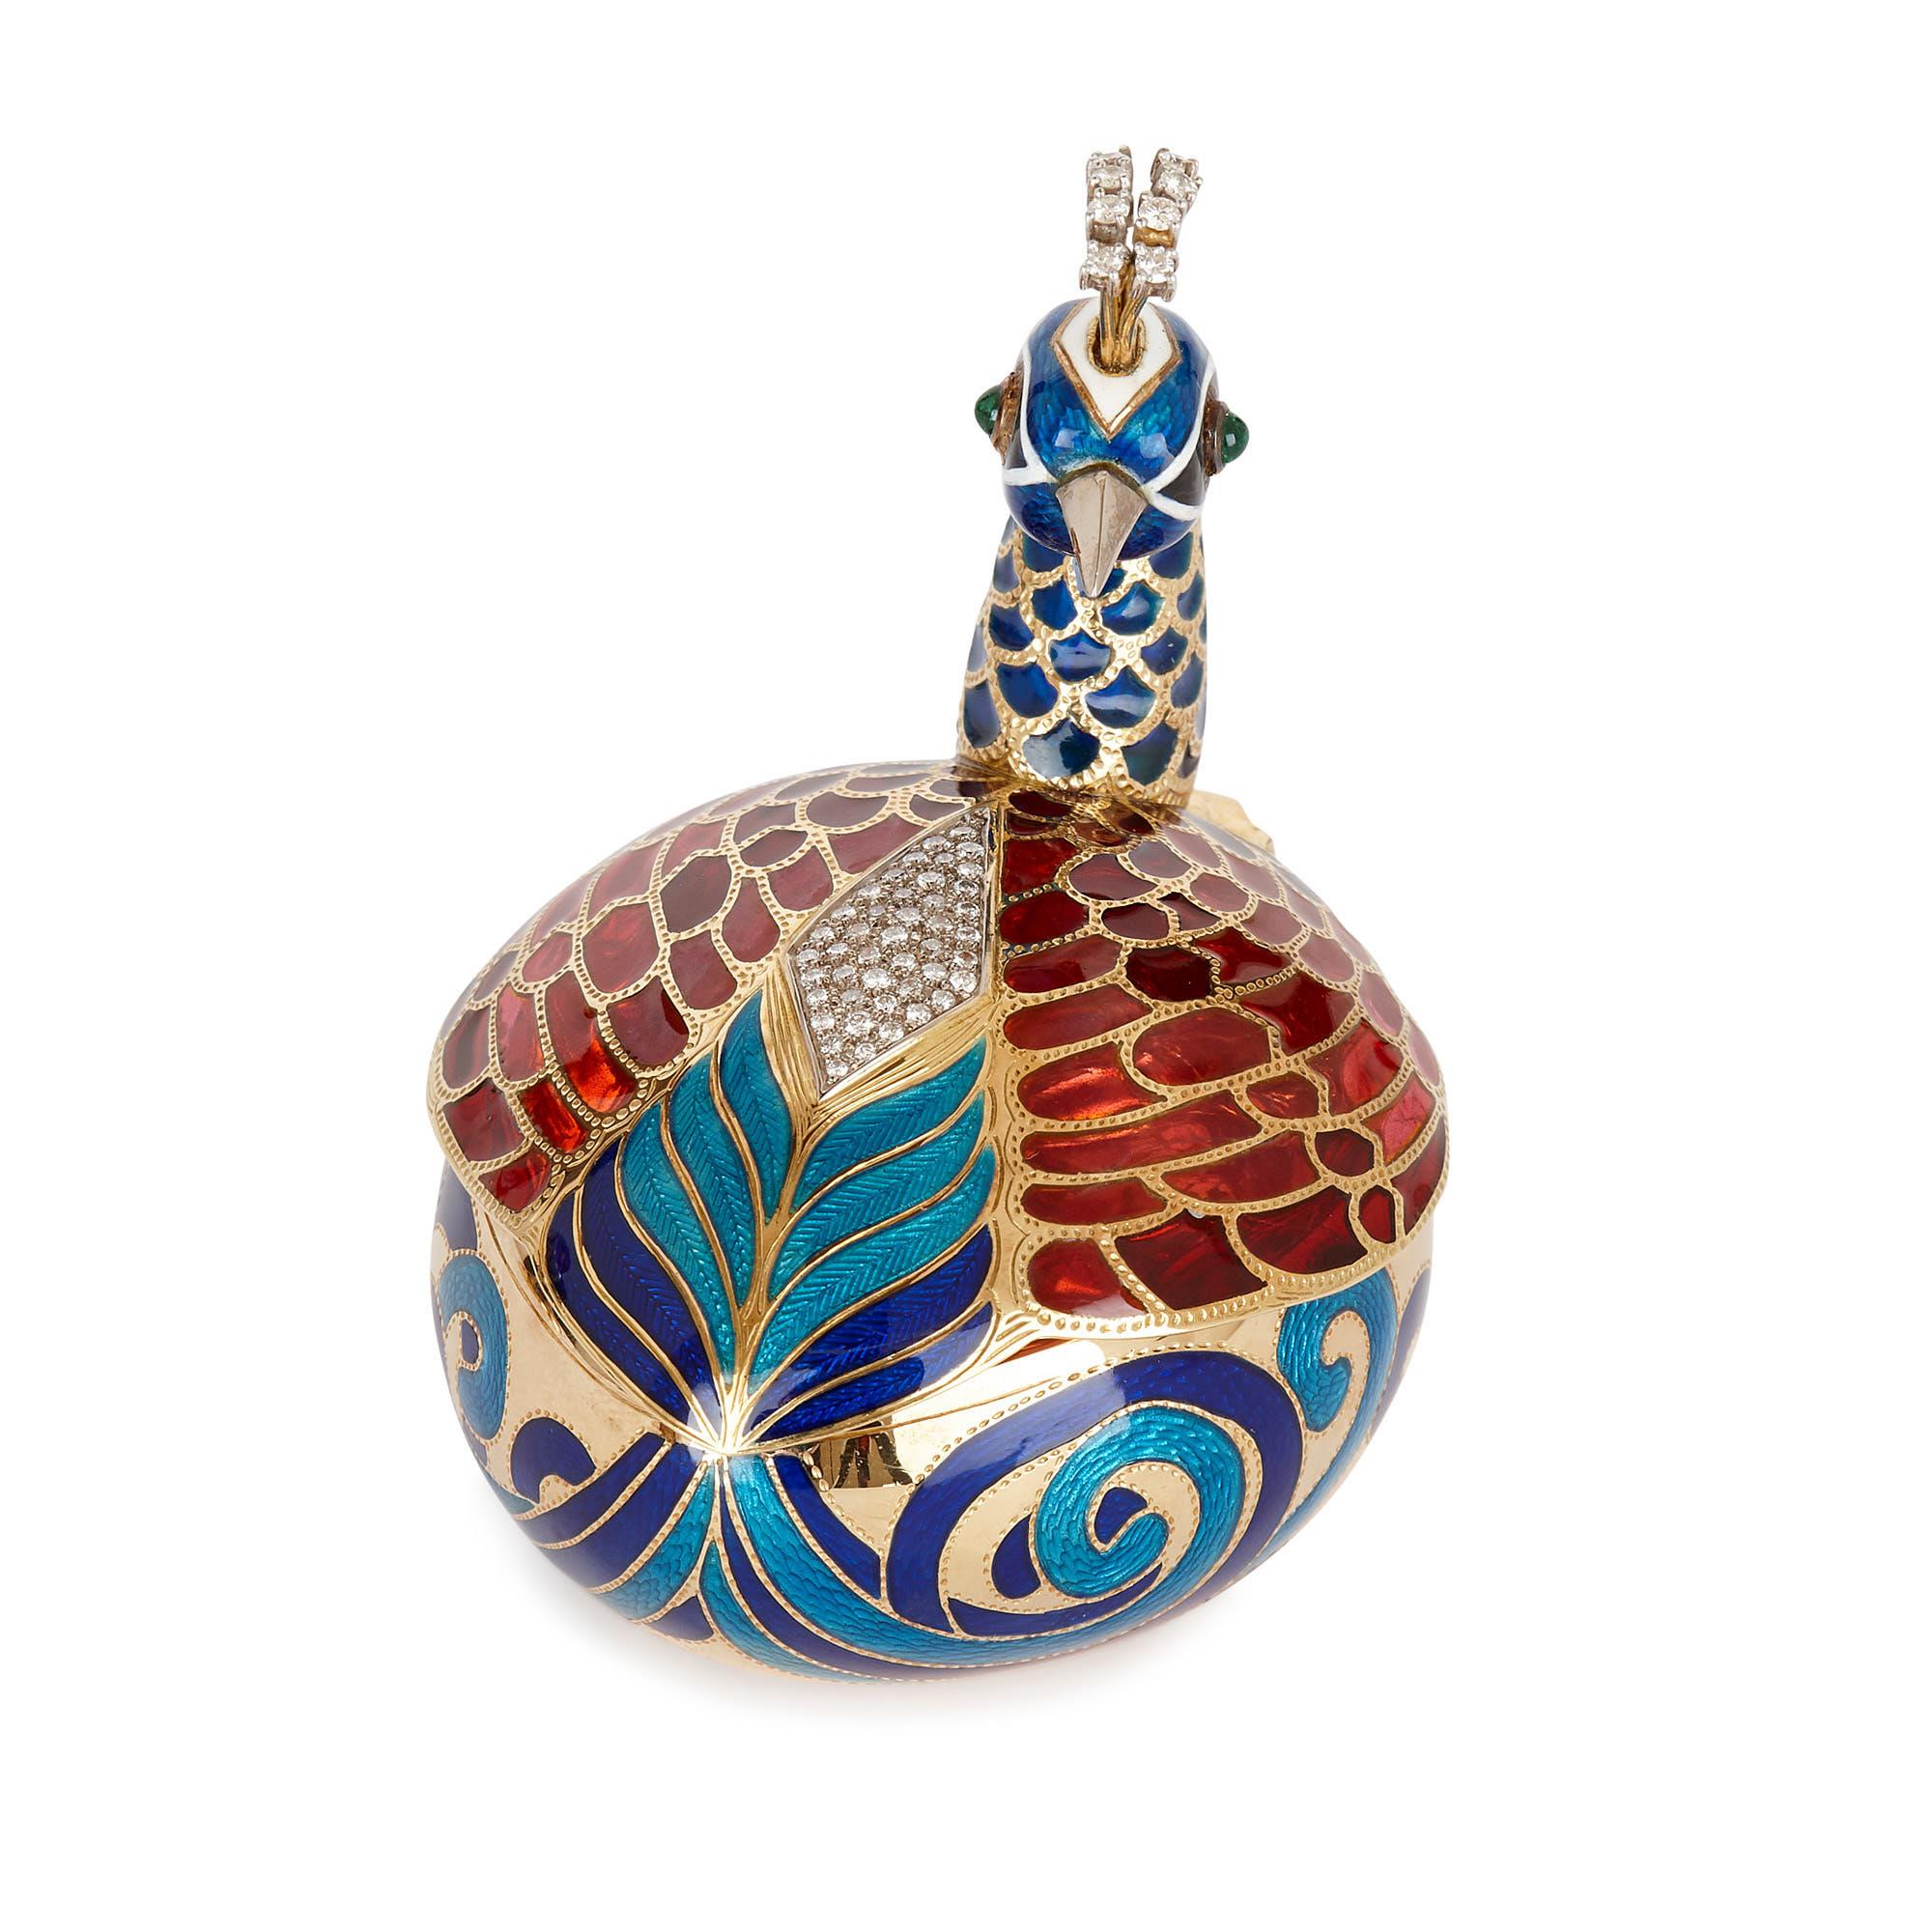 Enameled Fabergé Style Bejewelled and Enamelled Gold Egg by Asprey For Sale